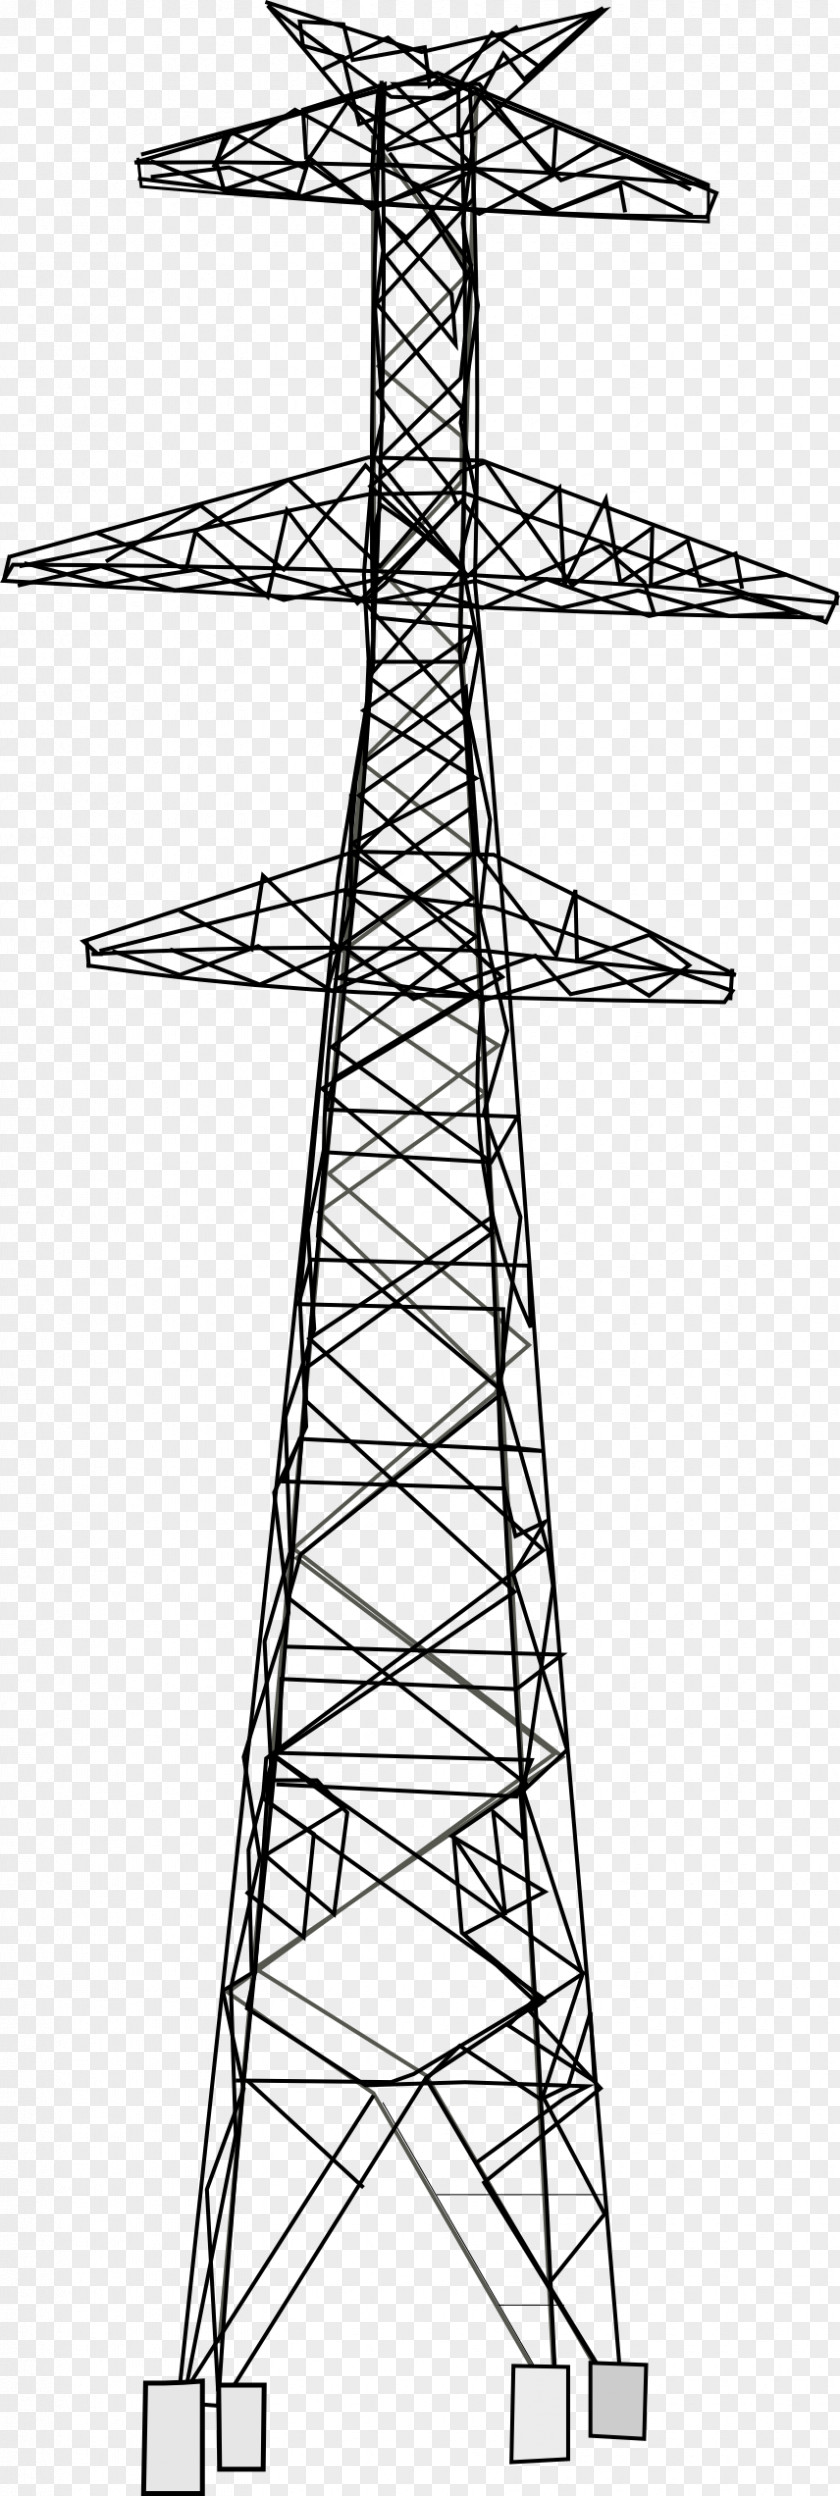 High Voltage Electricity Overhead Power Line Transmission Tower Insulator PNG